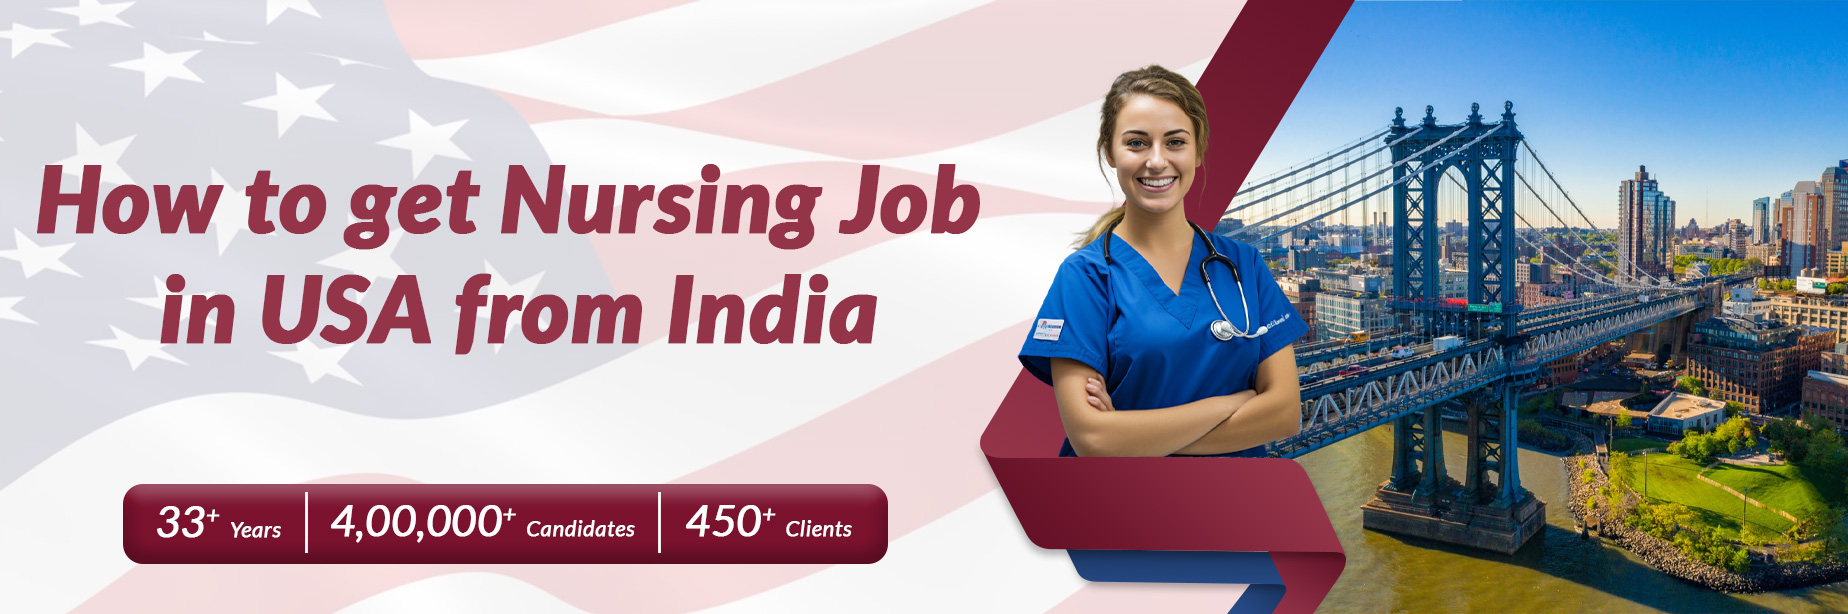 How to Get Nursing Job in USA From India